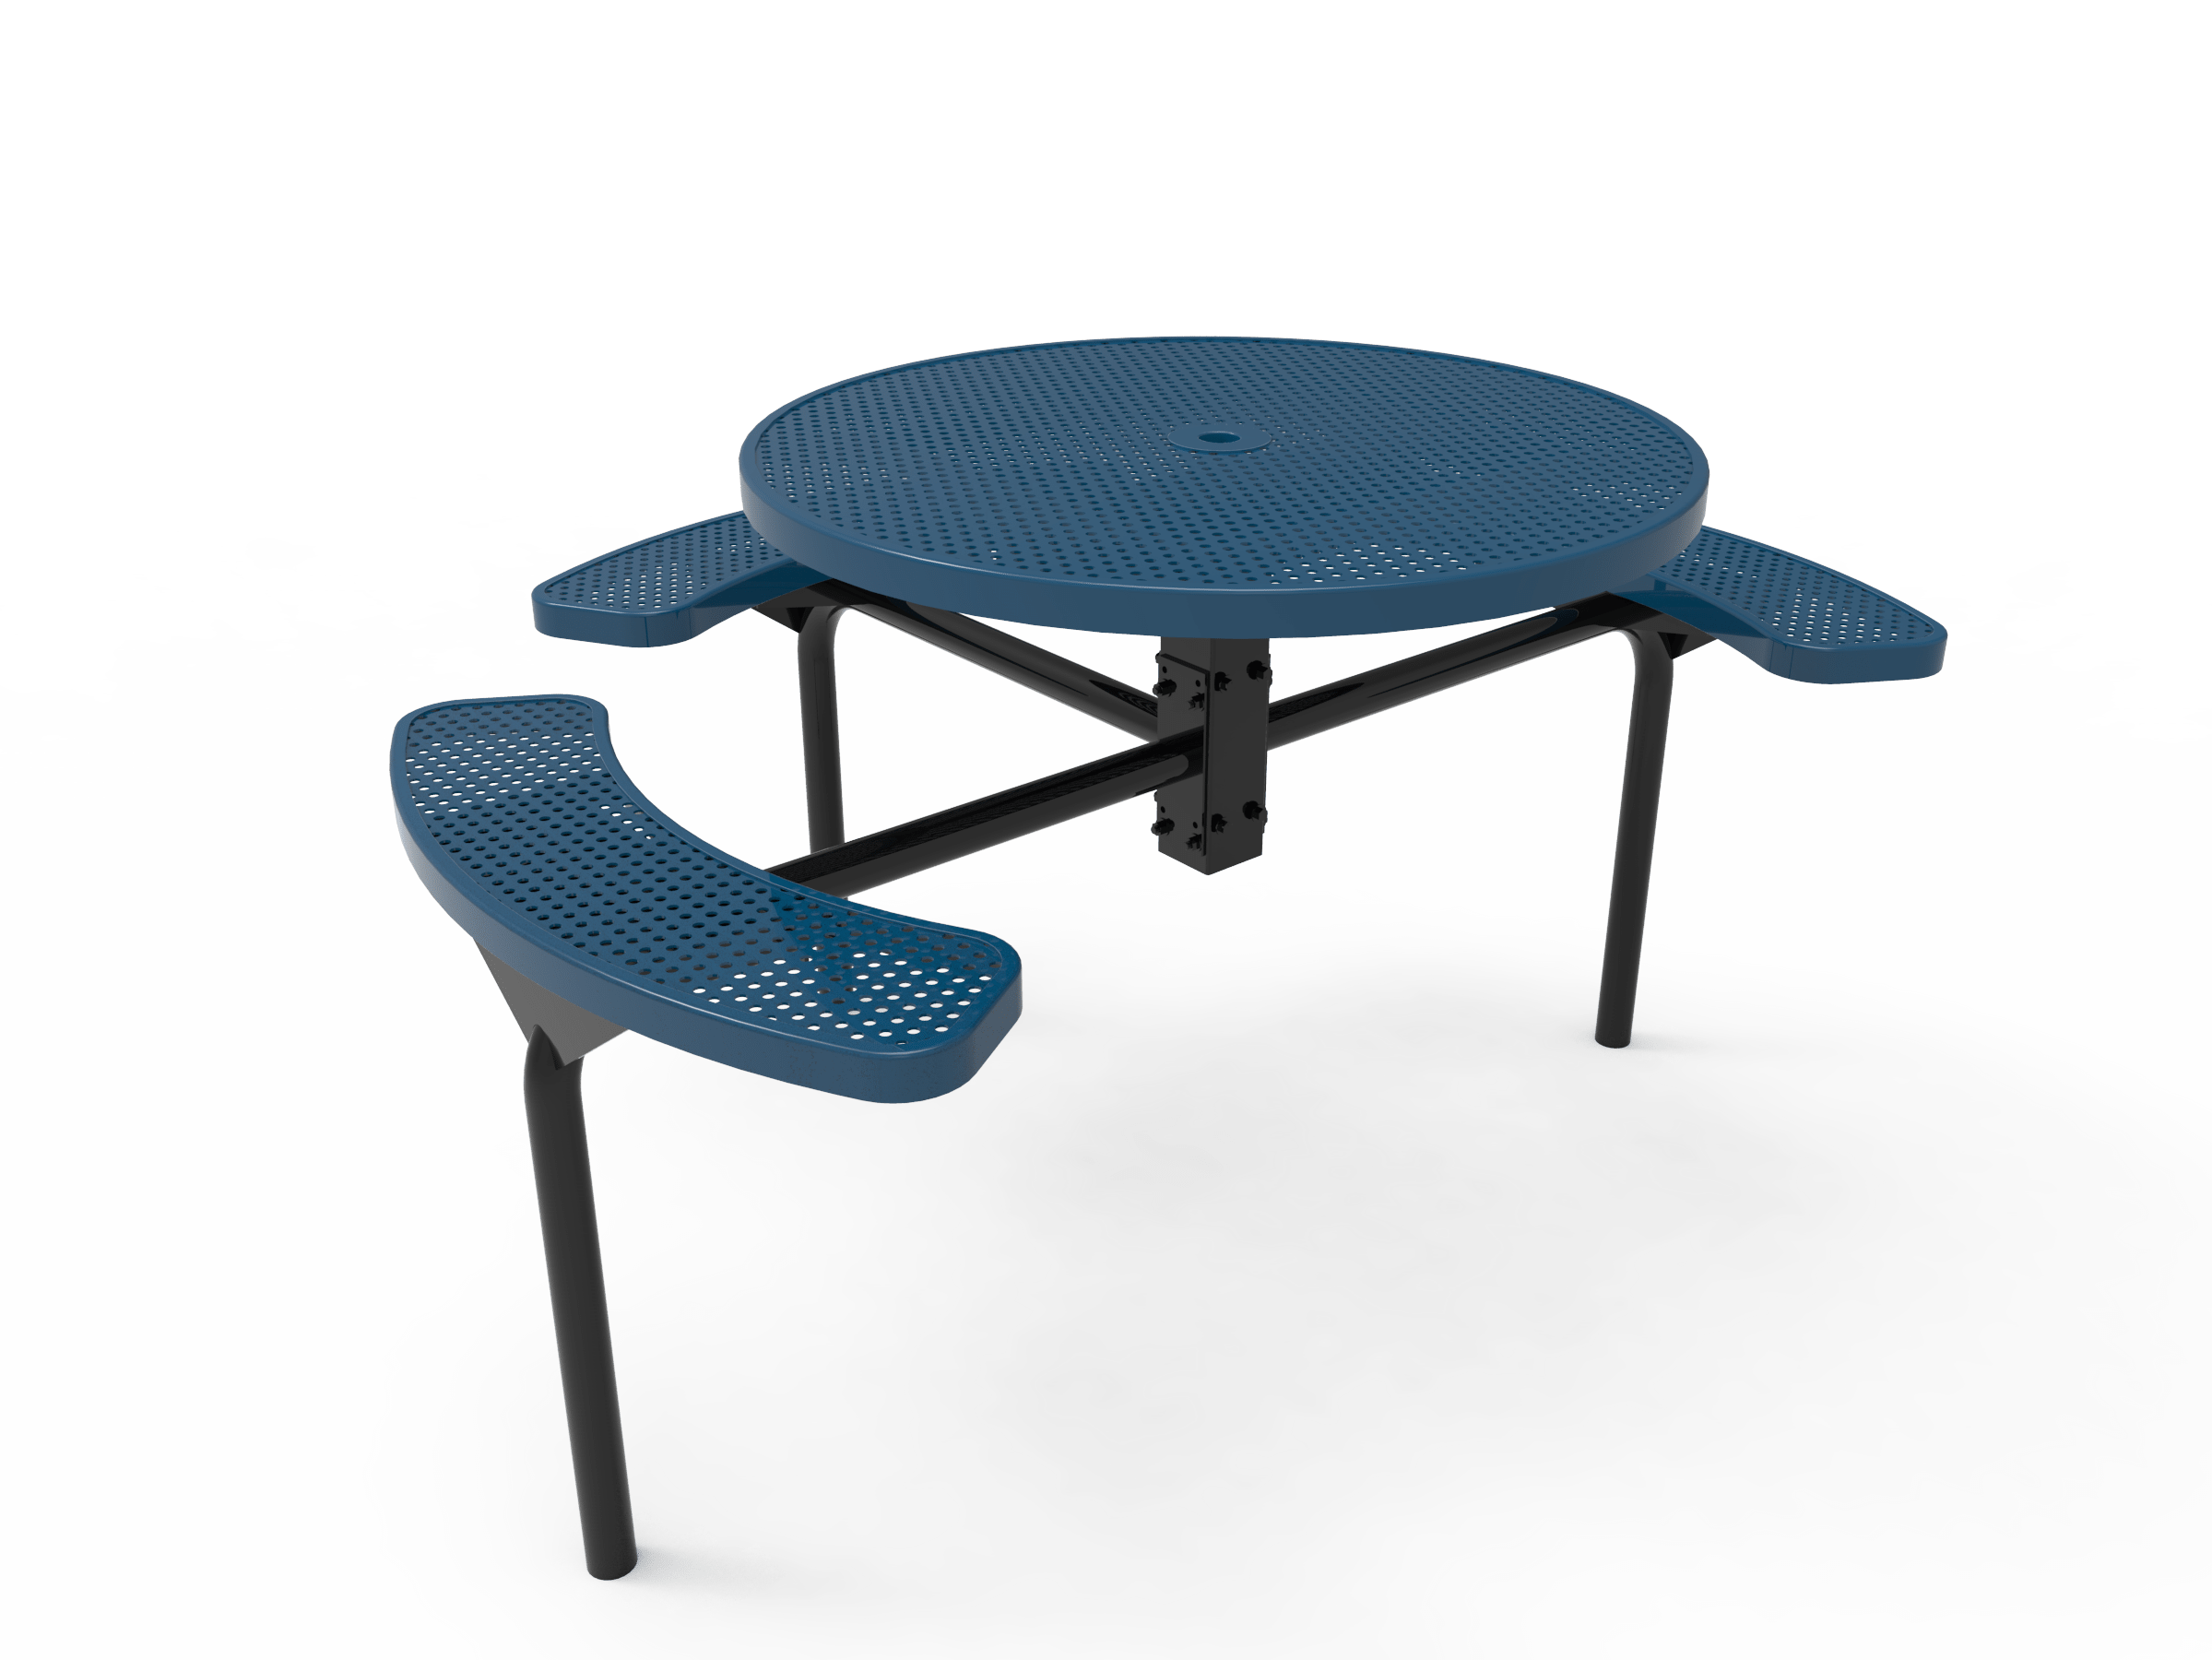 46″ Round Nexus In Ground Table With 3 Seats-Punched
TRD46-D-49-013
Industry Standard Finish
$1639.00
TRD46-B-49-013
Advantage Premium Finish
$2049.00
